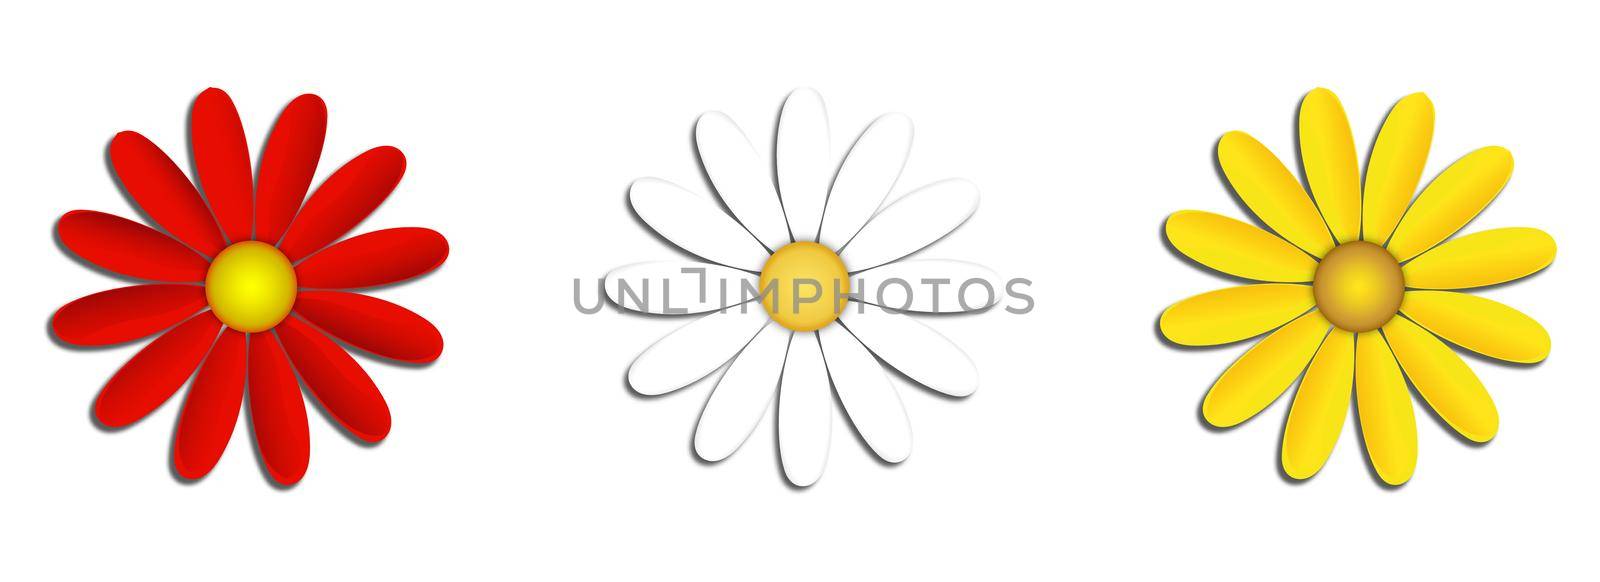 White, yellow and red chamomile flowers, gerberas on an isolated background. Clip art for floral fashion creative ideas. Stylish spring or summer nature background. by Alina_Lebed